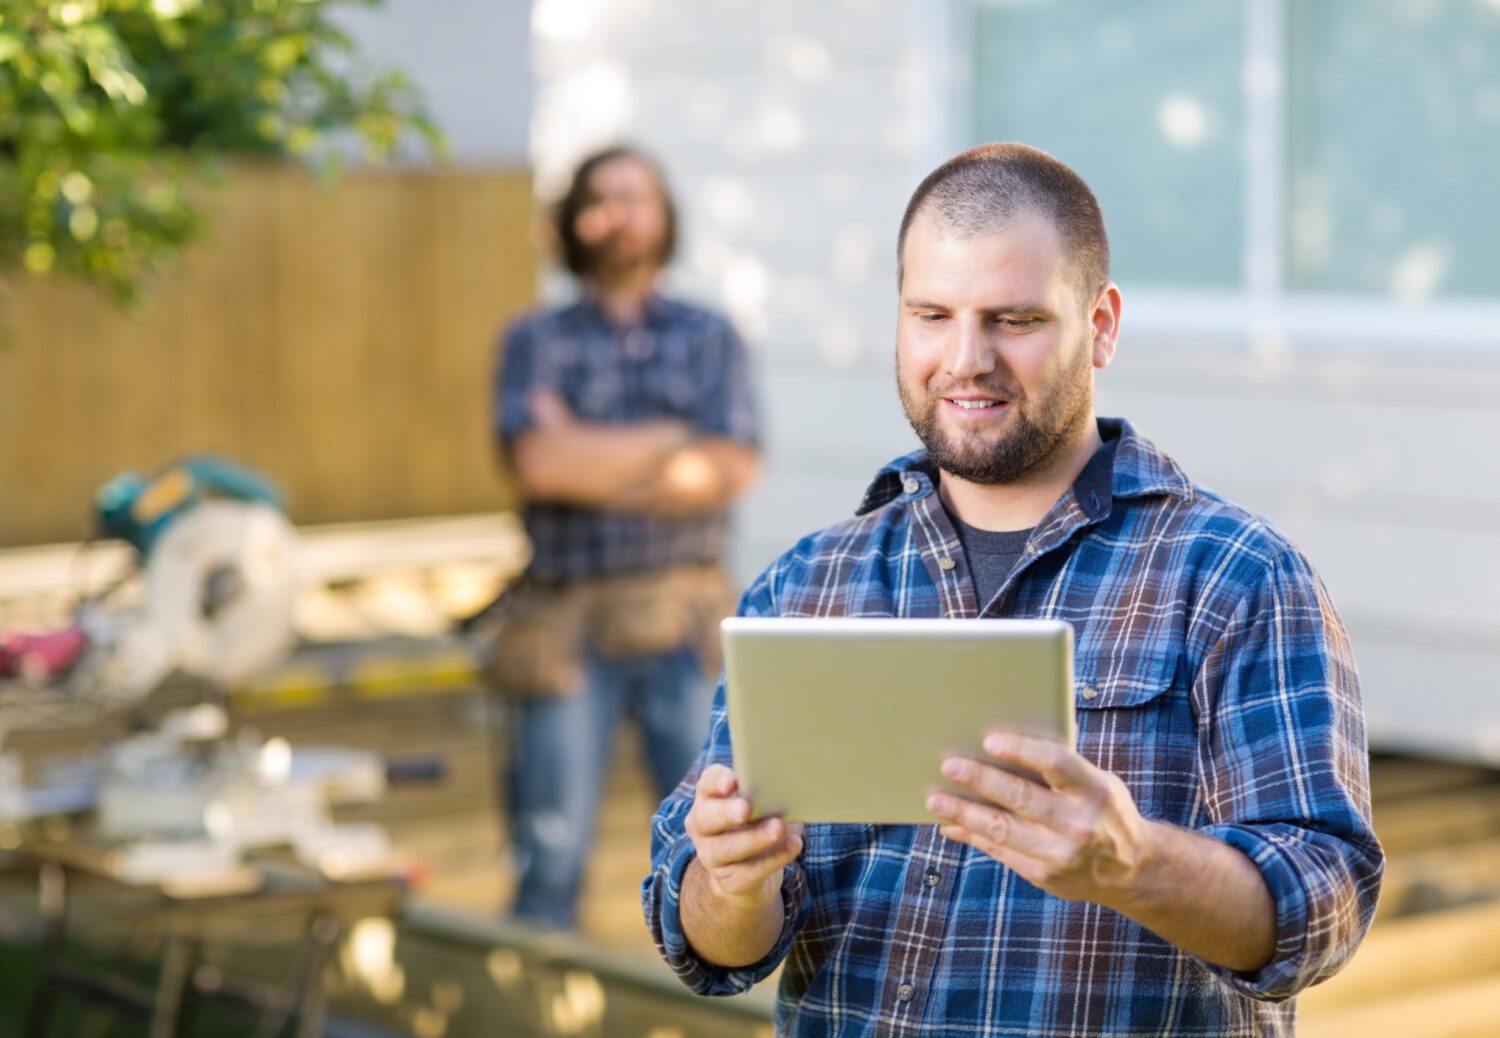 Carpenter Using Tablet With Coworker Standing In Background